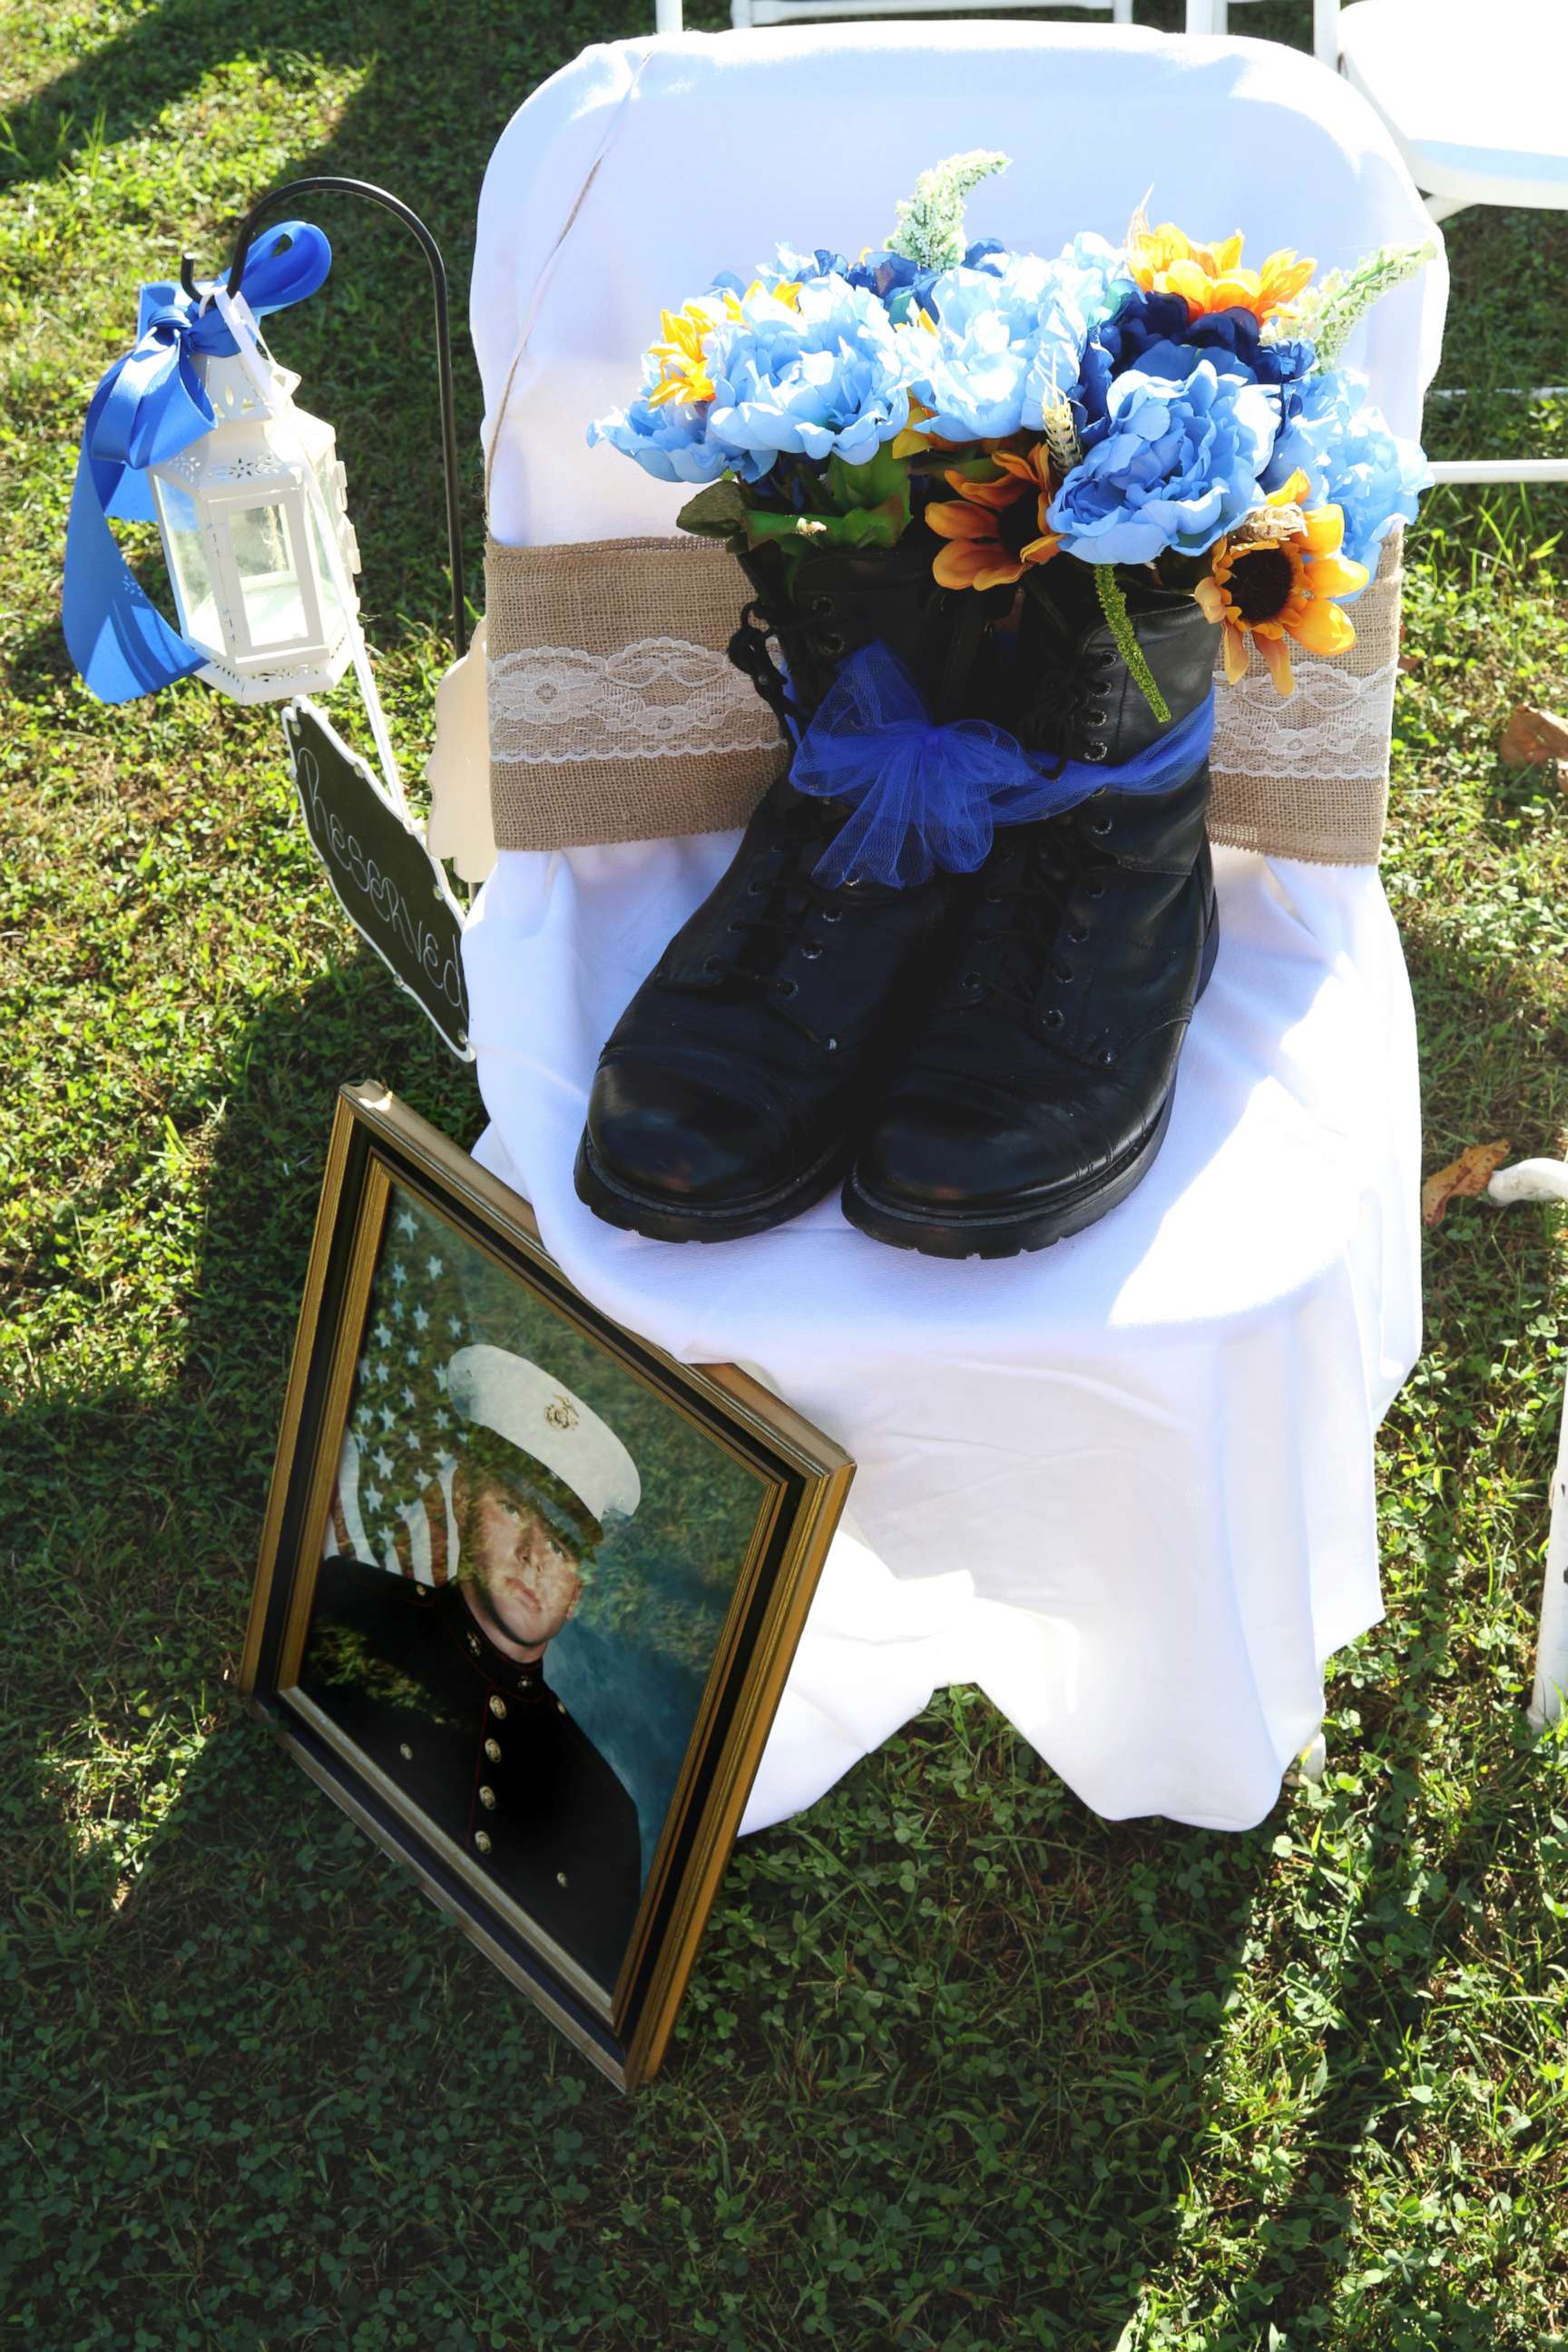 PHOTO: David Poling's Marine portrait and boots sat in the seat "where he would have been," said the bride.